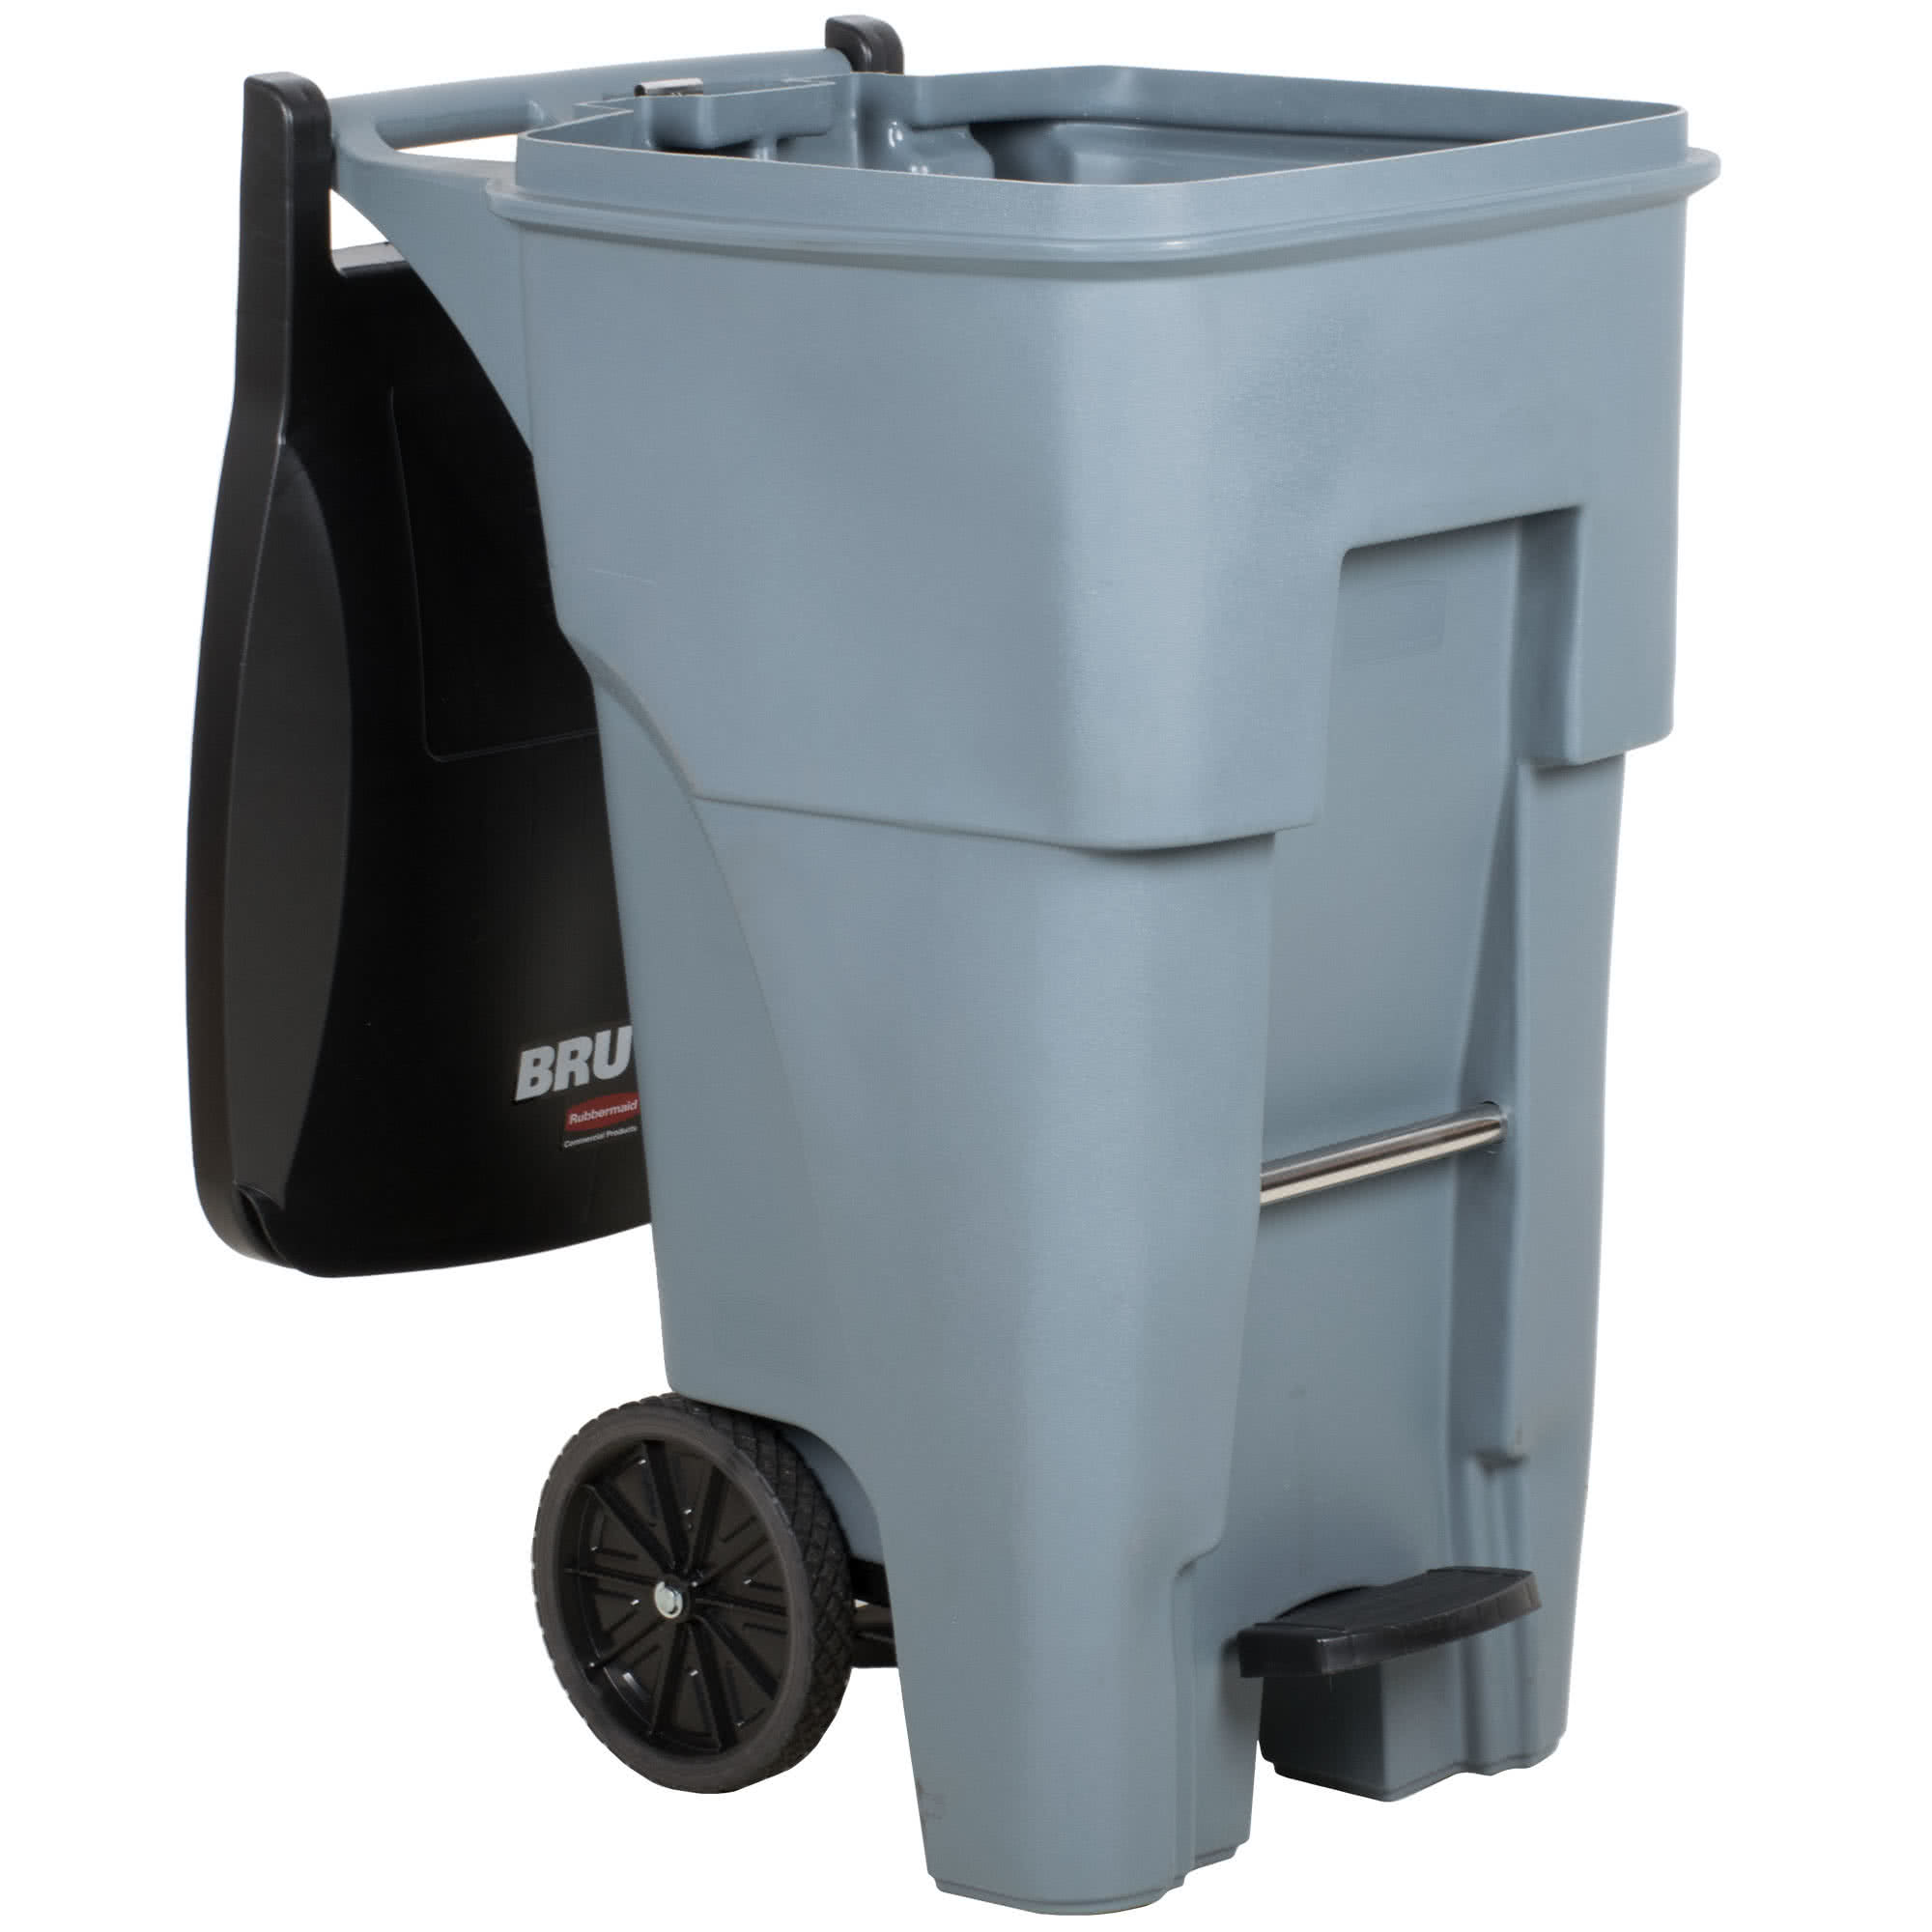 Rubbermaid 1971968 contenedor brute roll-out step-on con capacidad para 65 galones, color gris